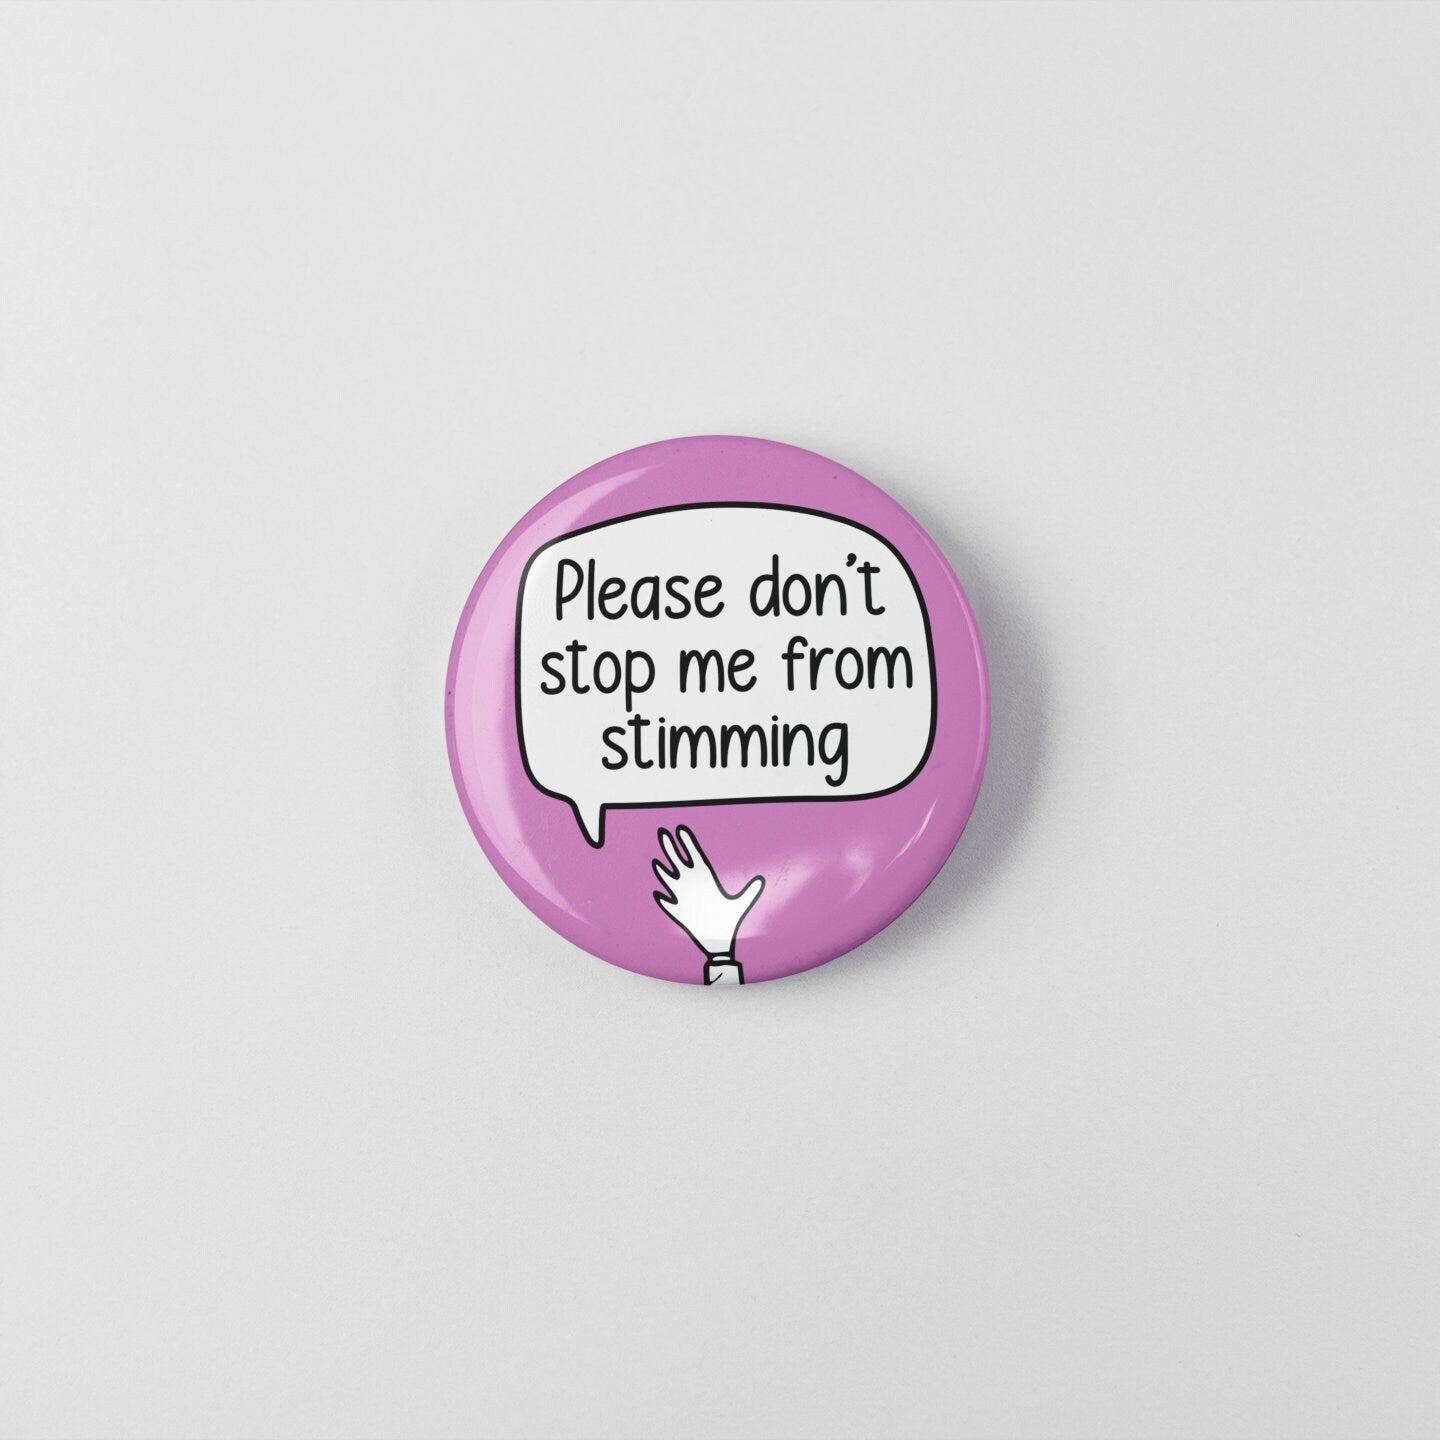 Please Don't Stop Me From Stimming - Badge Pin | Stimmy - Flappy Hands - Stimming Gift